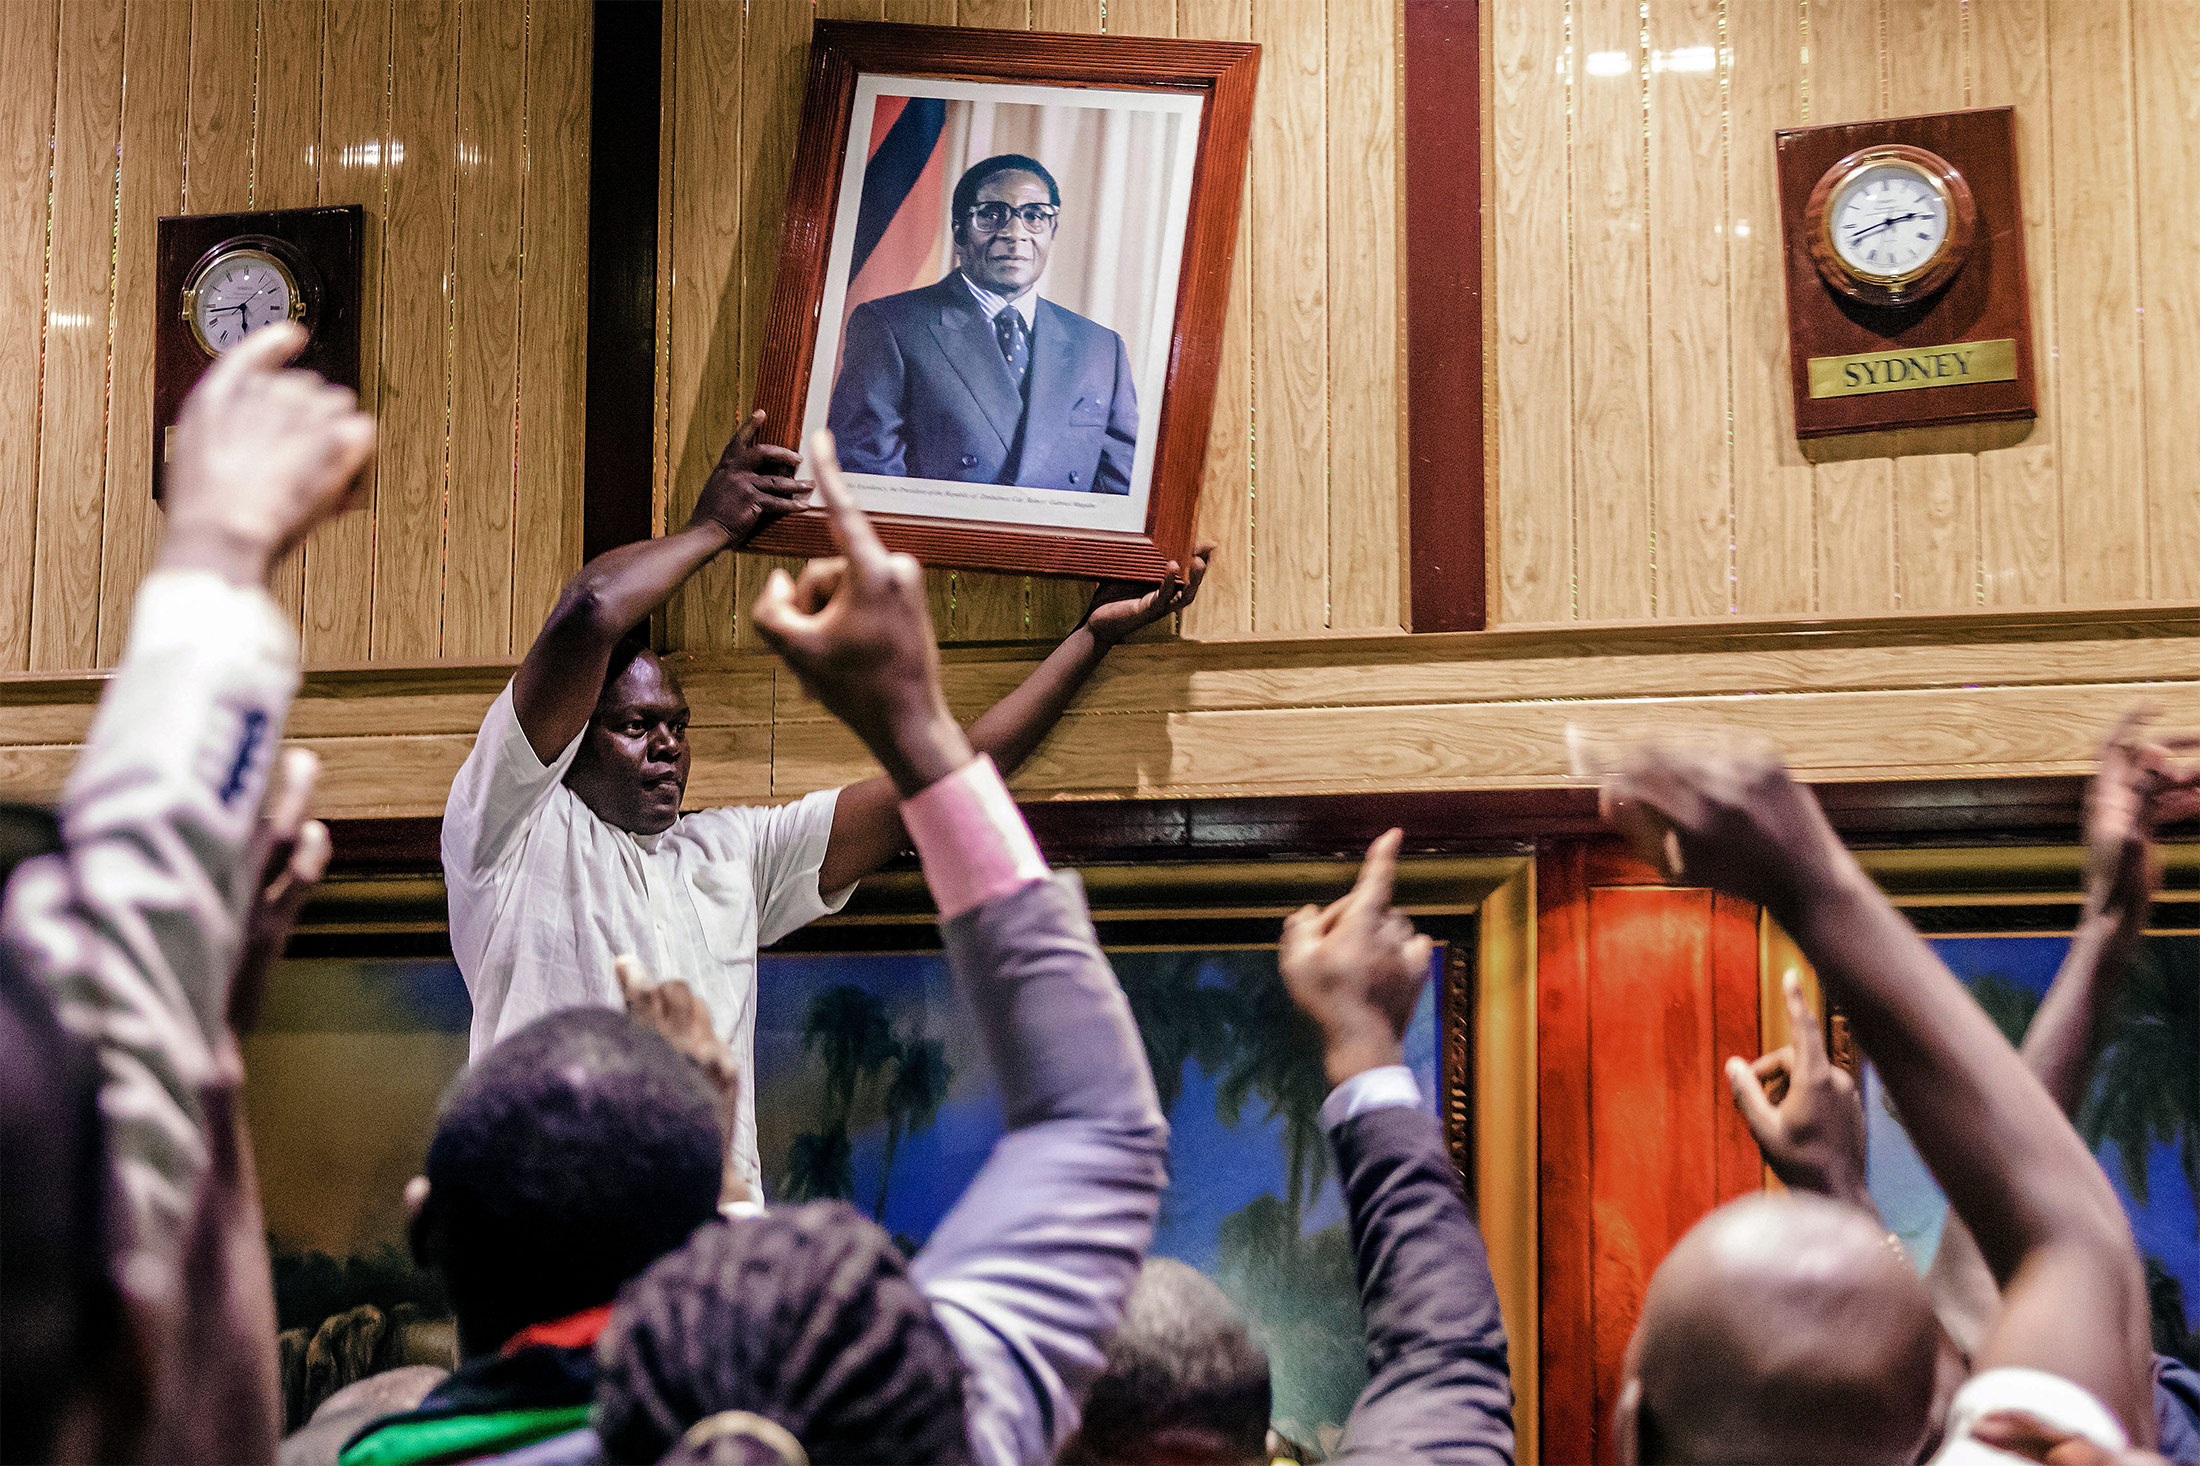 People remove the portrait of former Zimbabwean President Robert Mugabe, from the wall at the International Conference center, where parliament had their sitting, after his resignation on Nov. 21, 2017 in Harare.&nbsp;